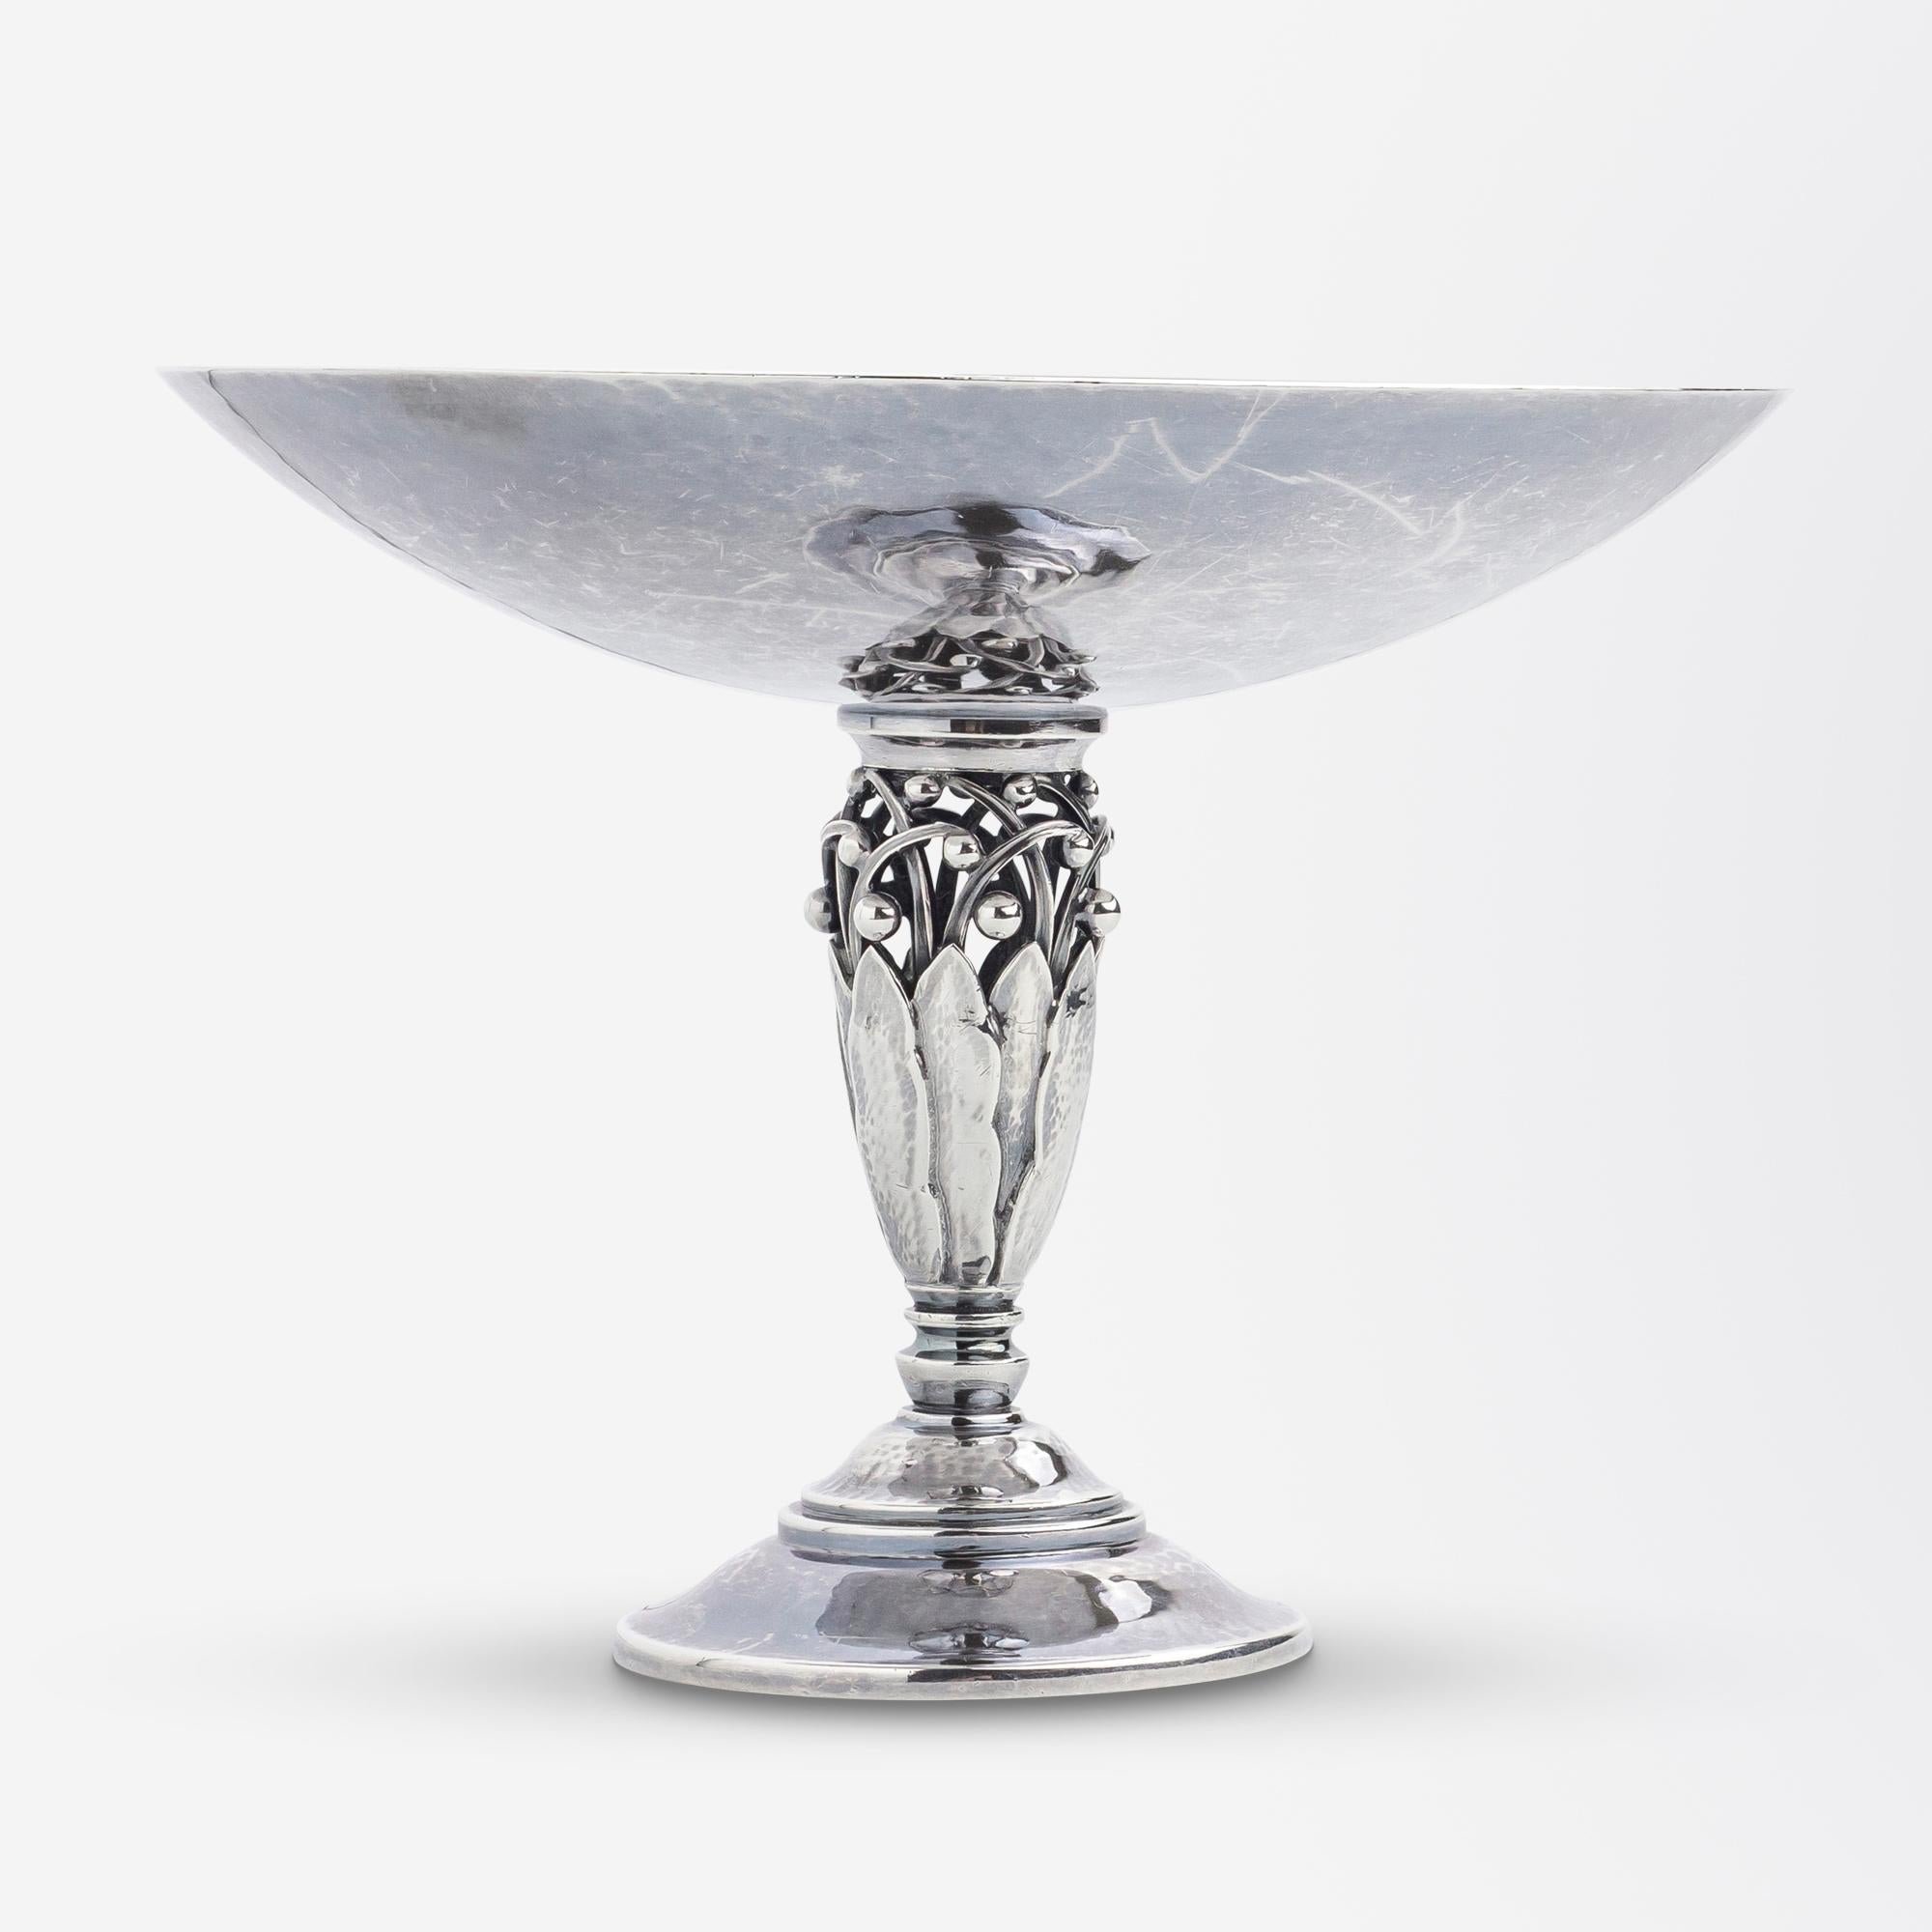 This really charming tazza or 'footed comport' was crafted by Georg Jensen in a design first conceived by Johan Rohde (1856-1935) known as pattern '574C'. The piece features a shallow bowl to the top which is supported by an openwork stylised leaf